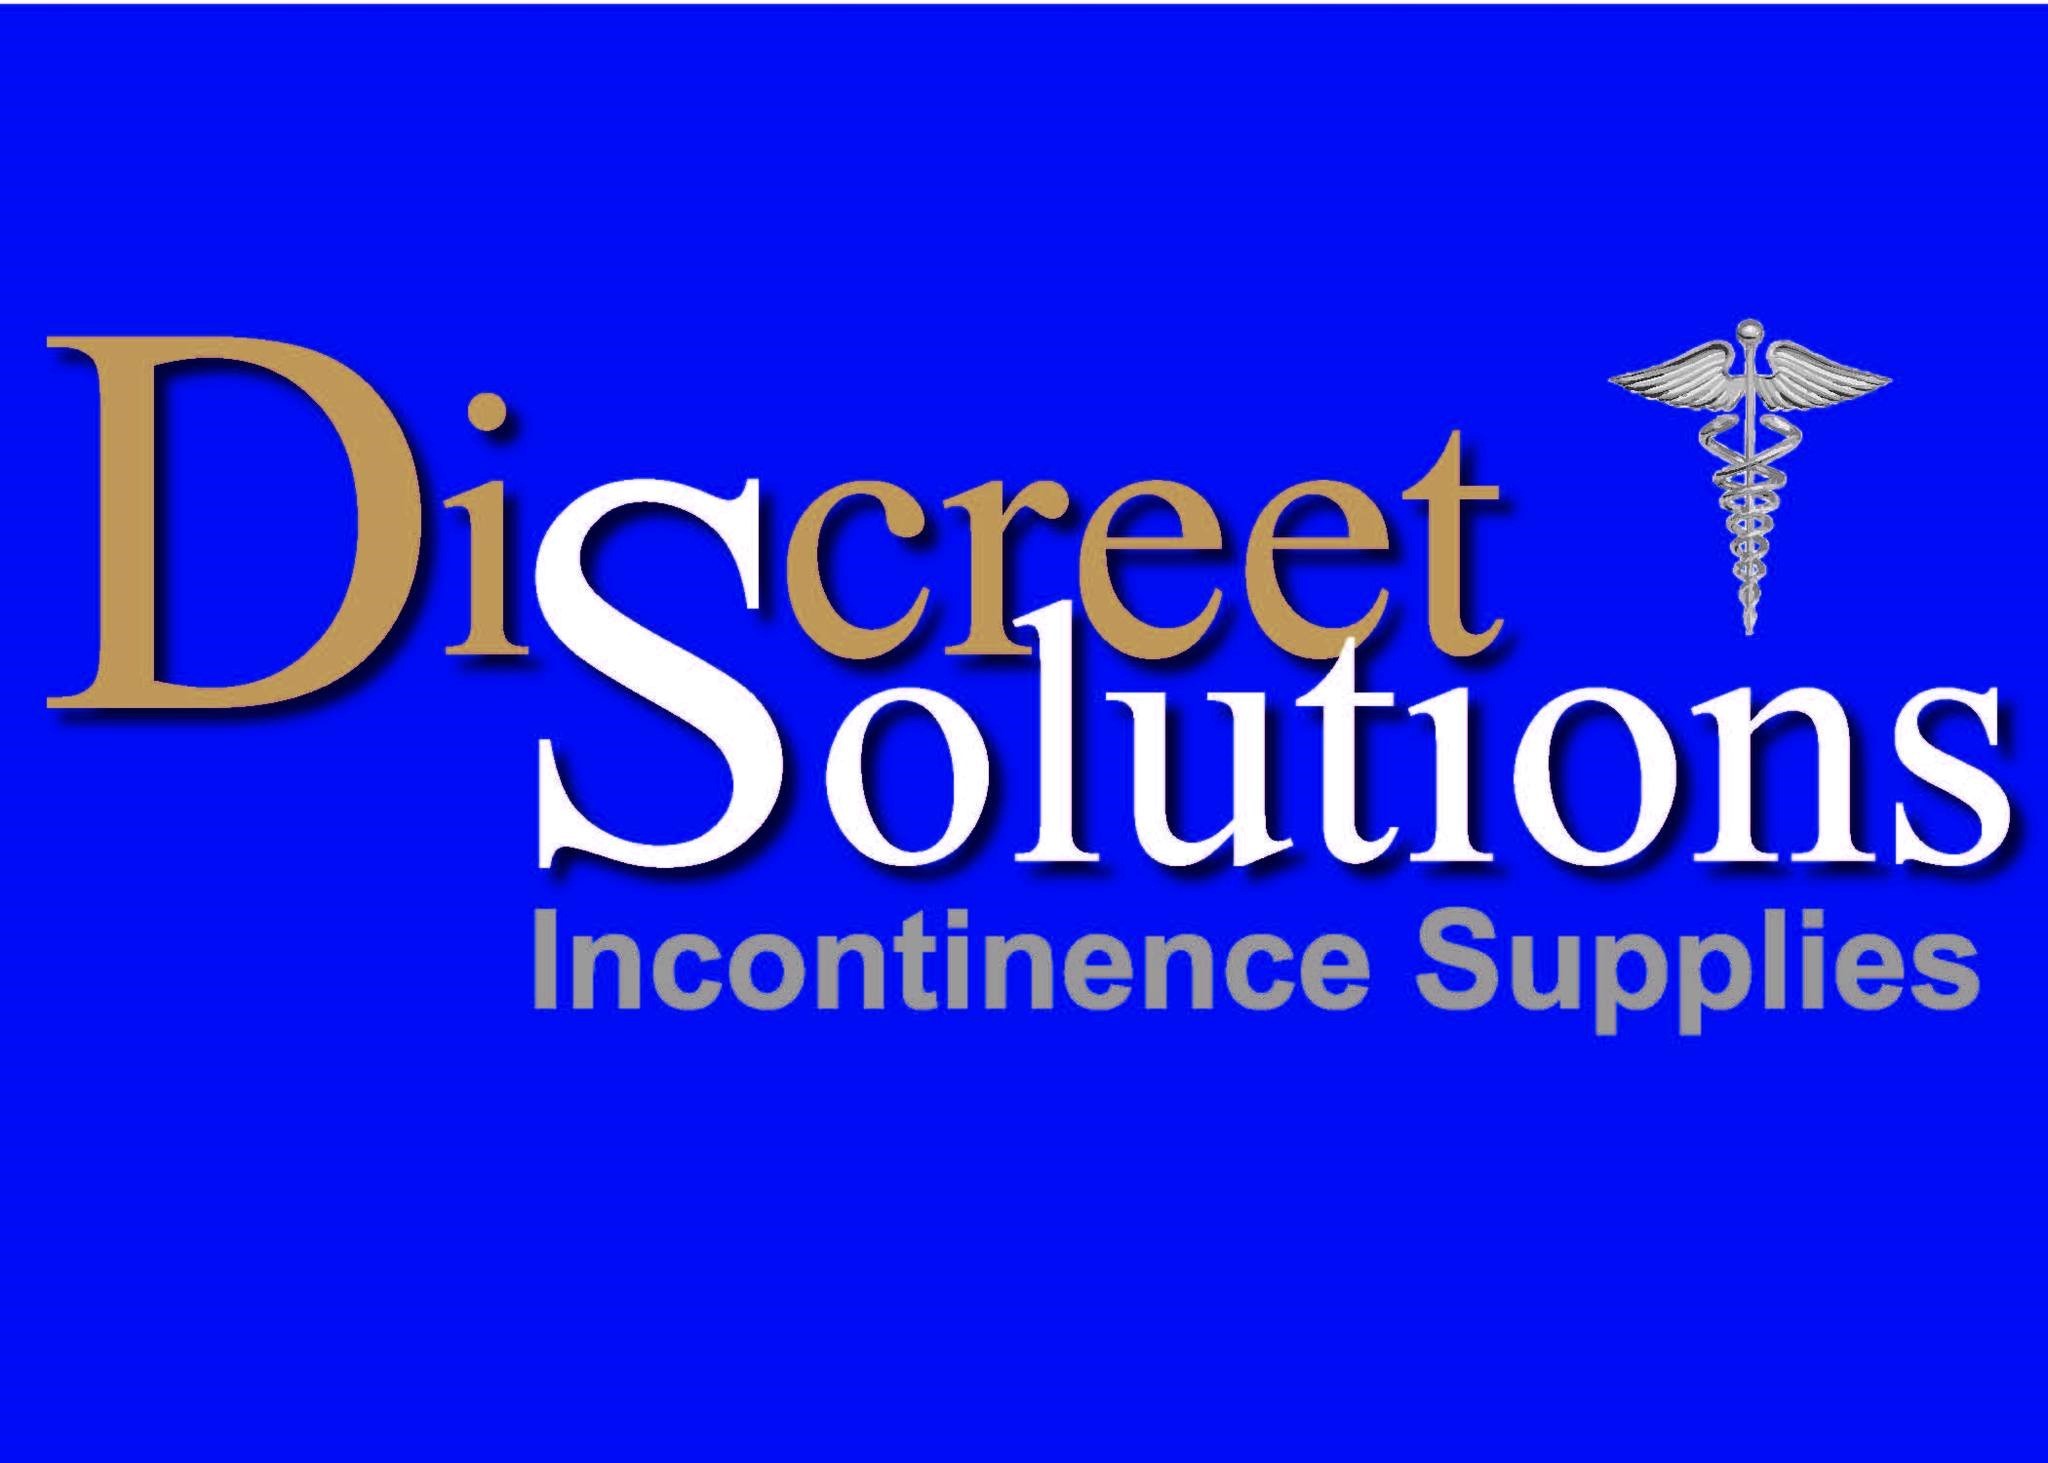 D. Discreet Solutions Incontinence Supplies (Tier 4)